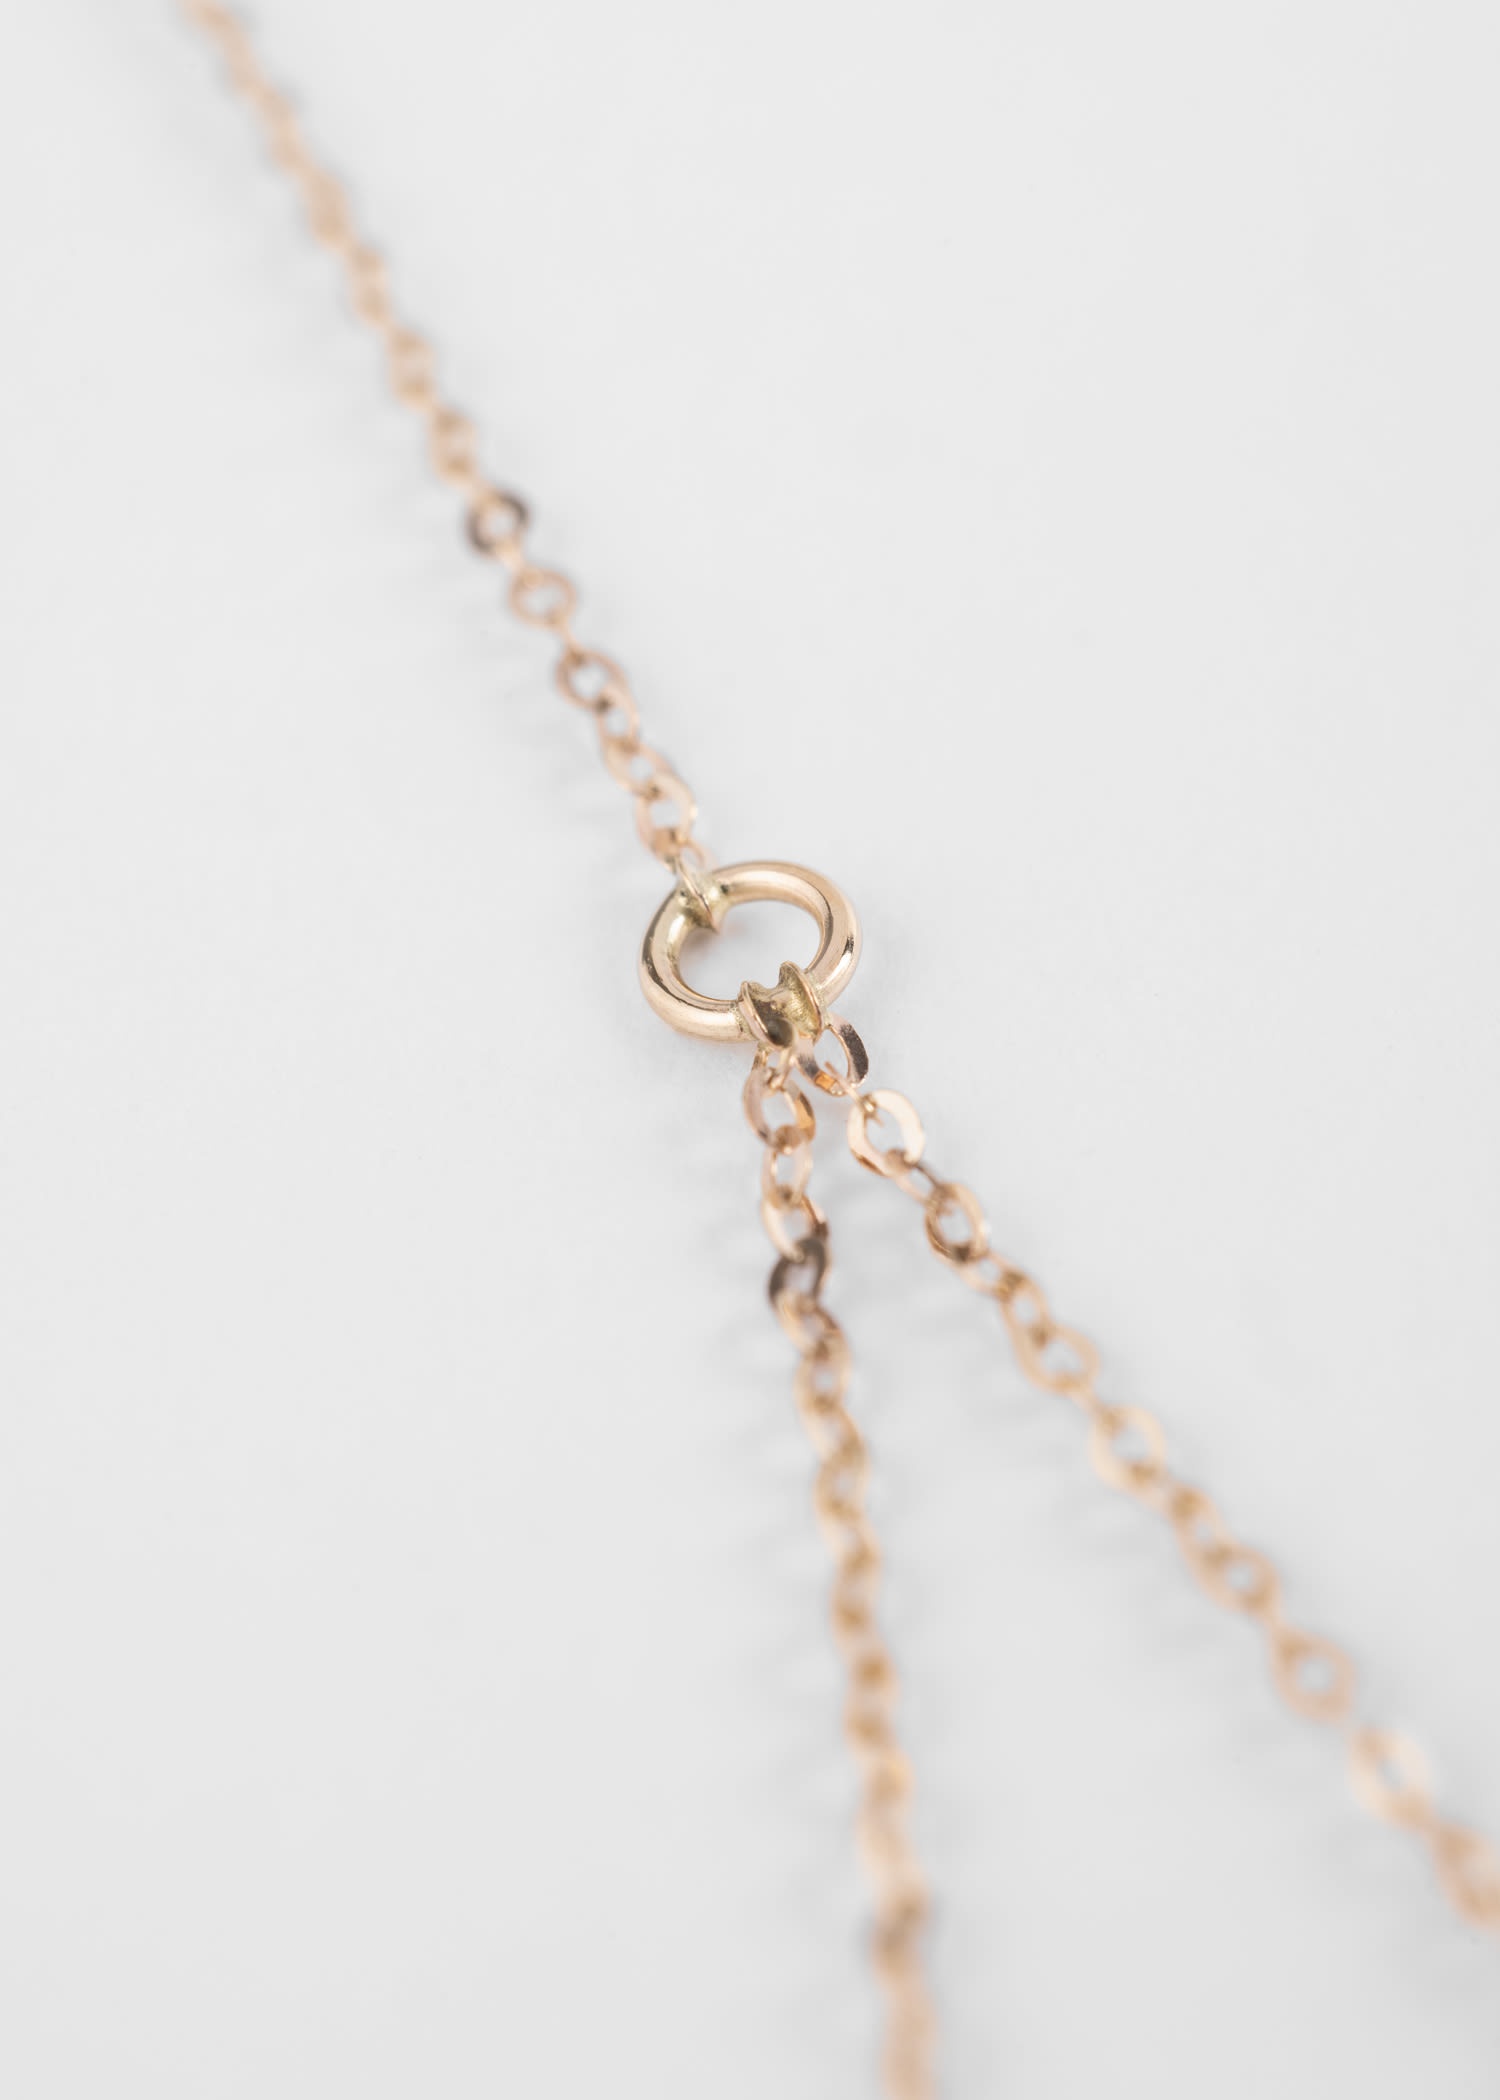 'Charlotte' Gold Double Chain Necklace by Helena Rohner - 4